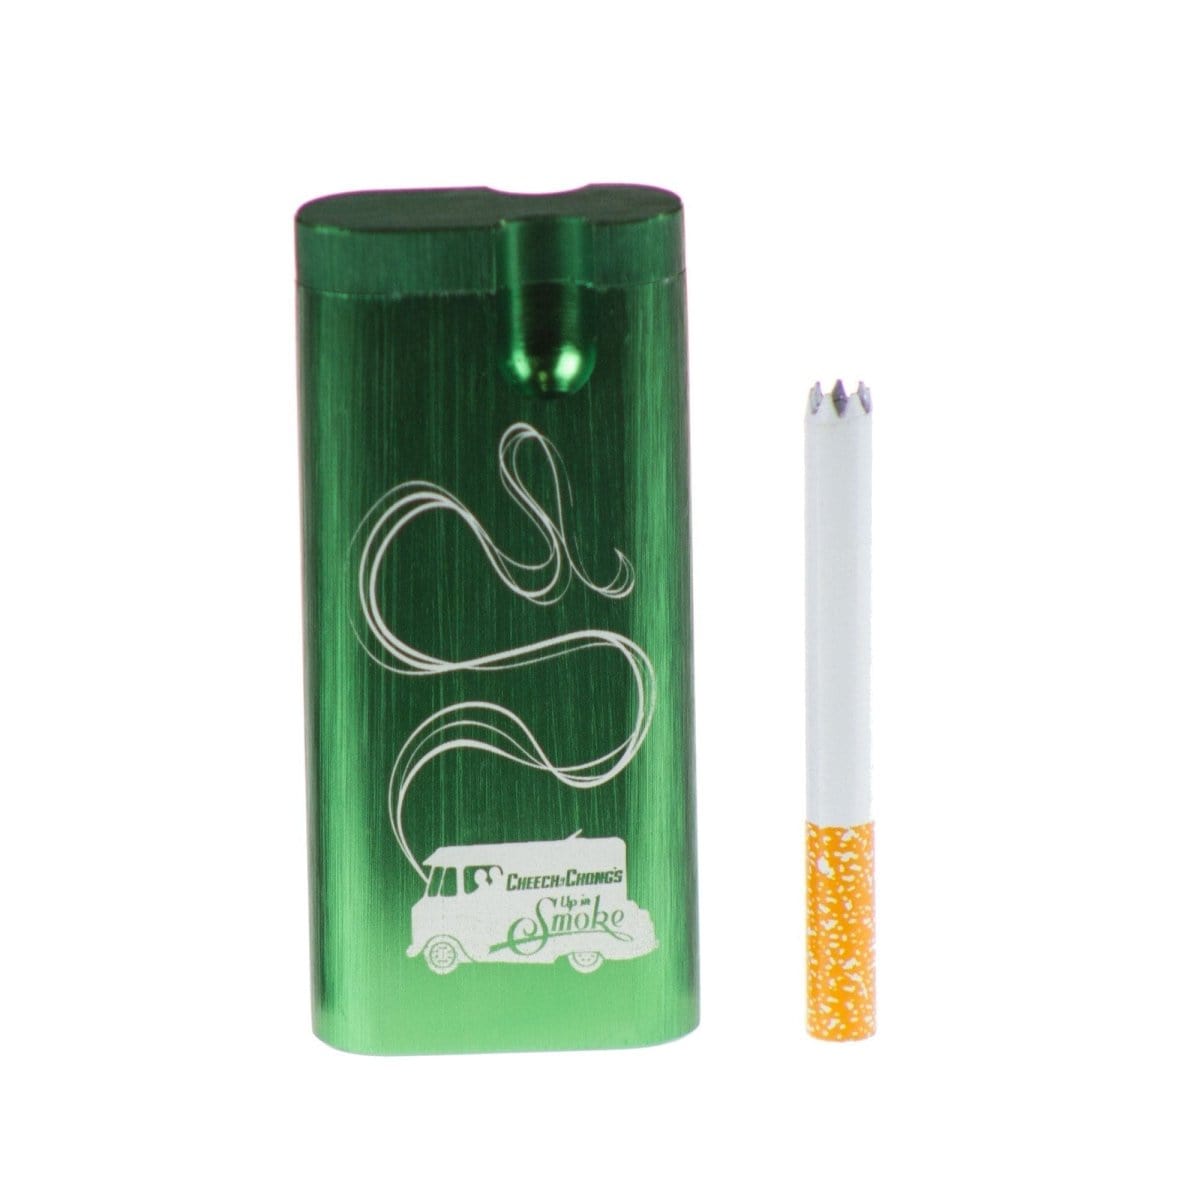 Cheech and Chong Up in Smoke Dugout Green Famous X Dugout and One Hitter